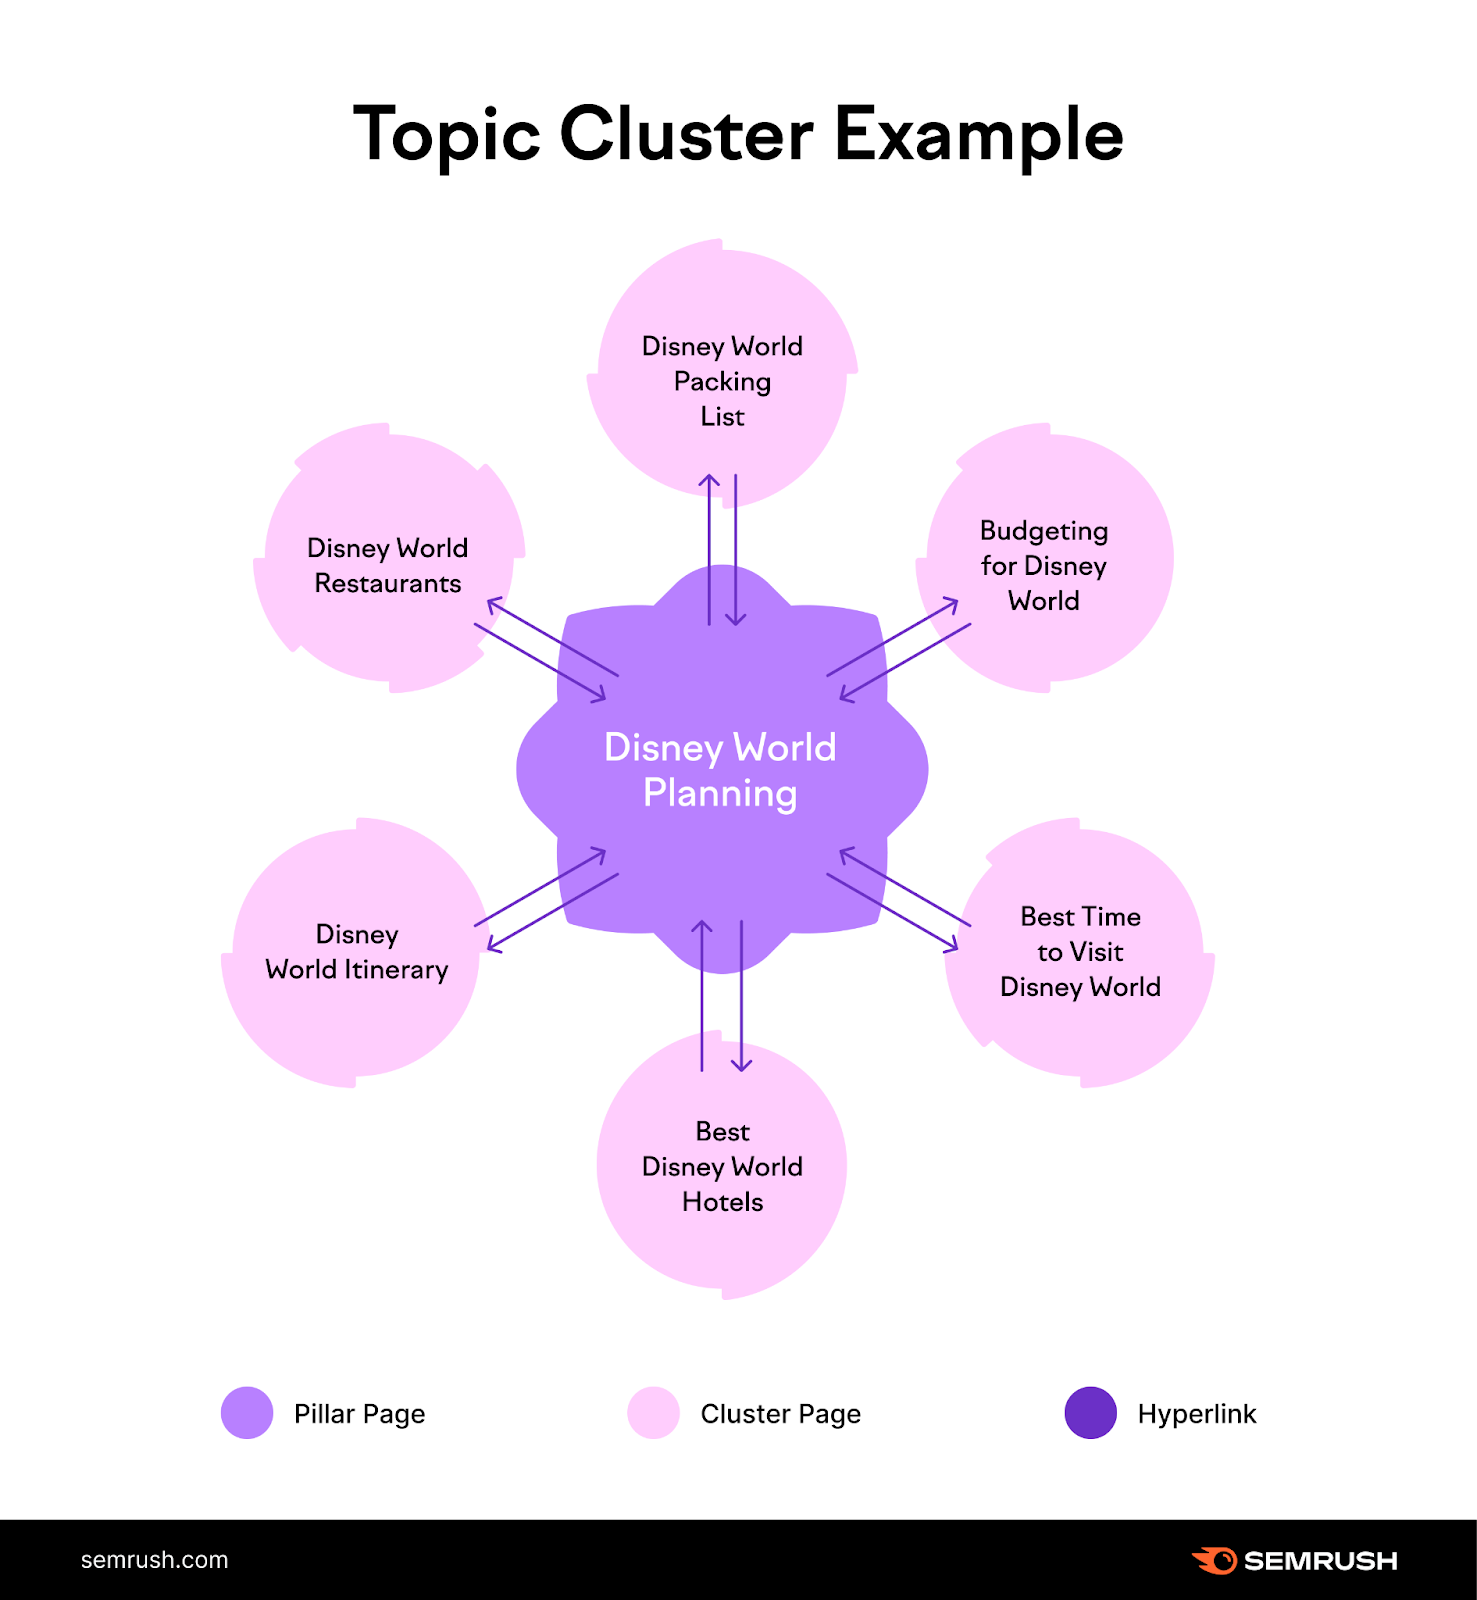 A topic cluster on Disney World Planning